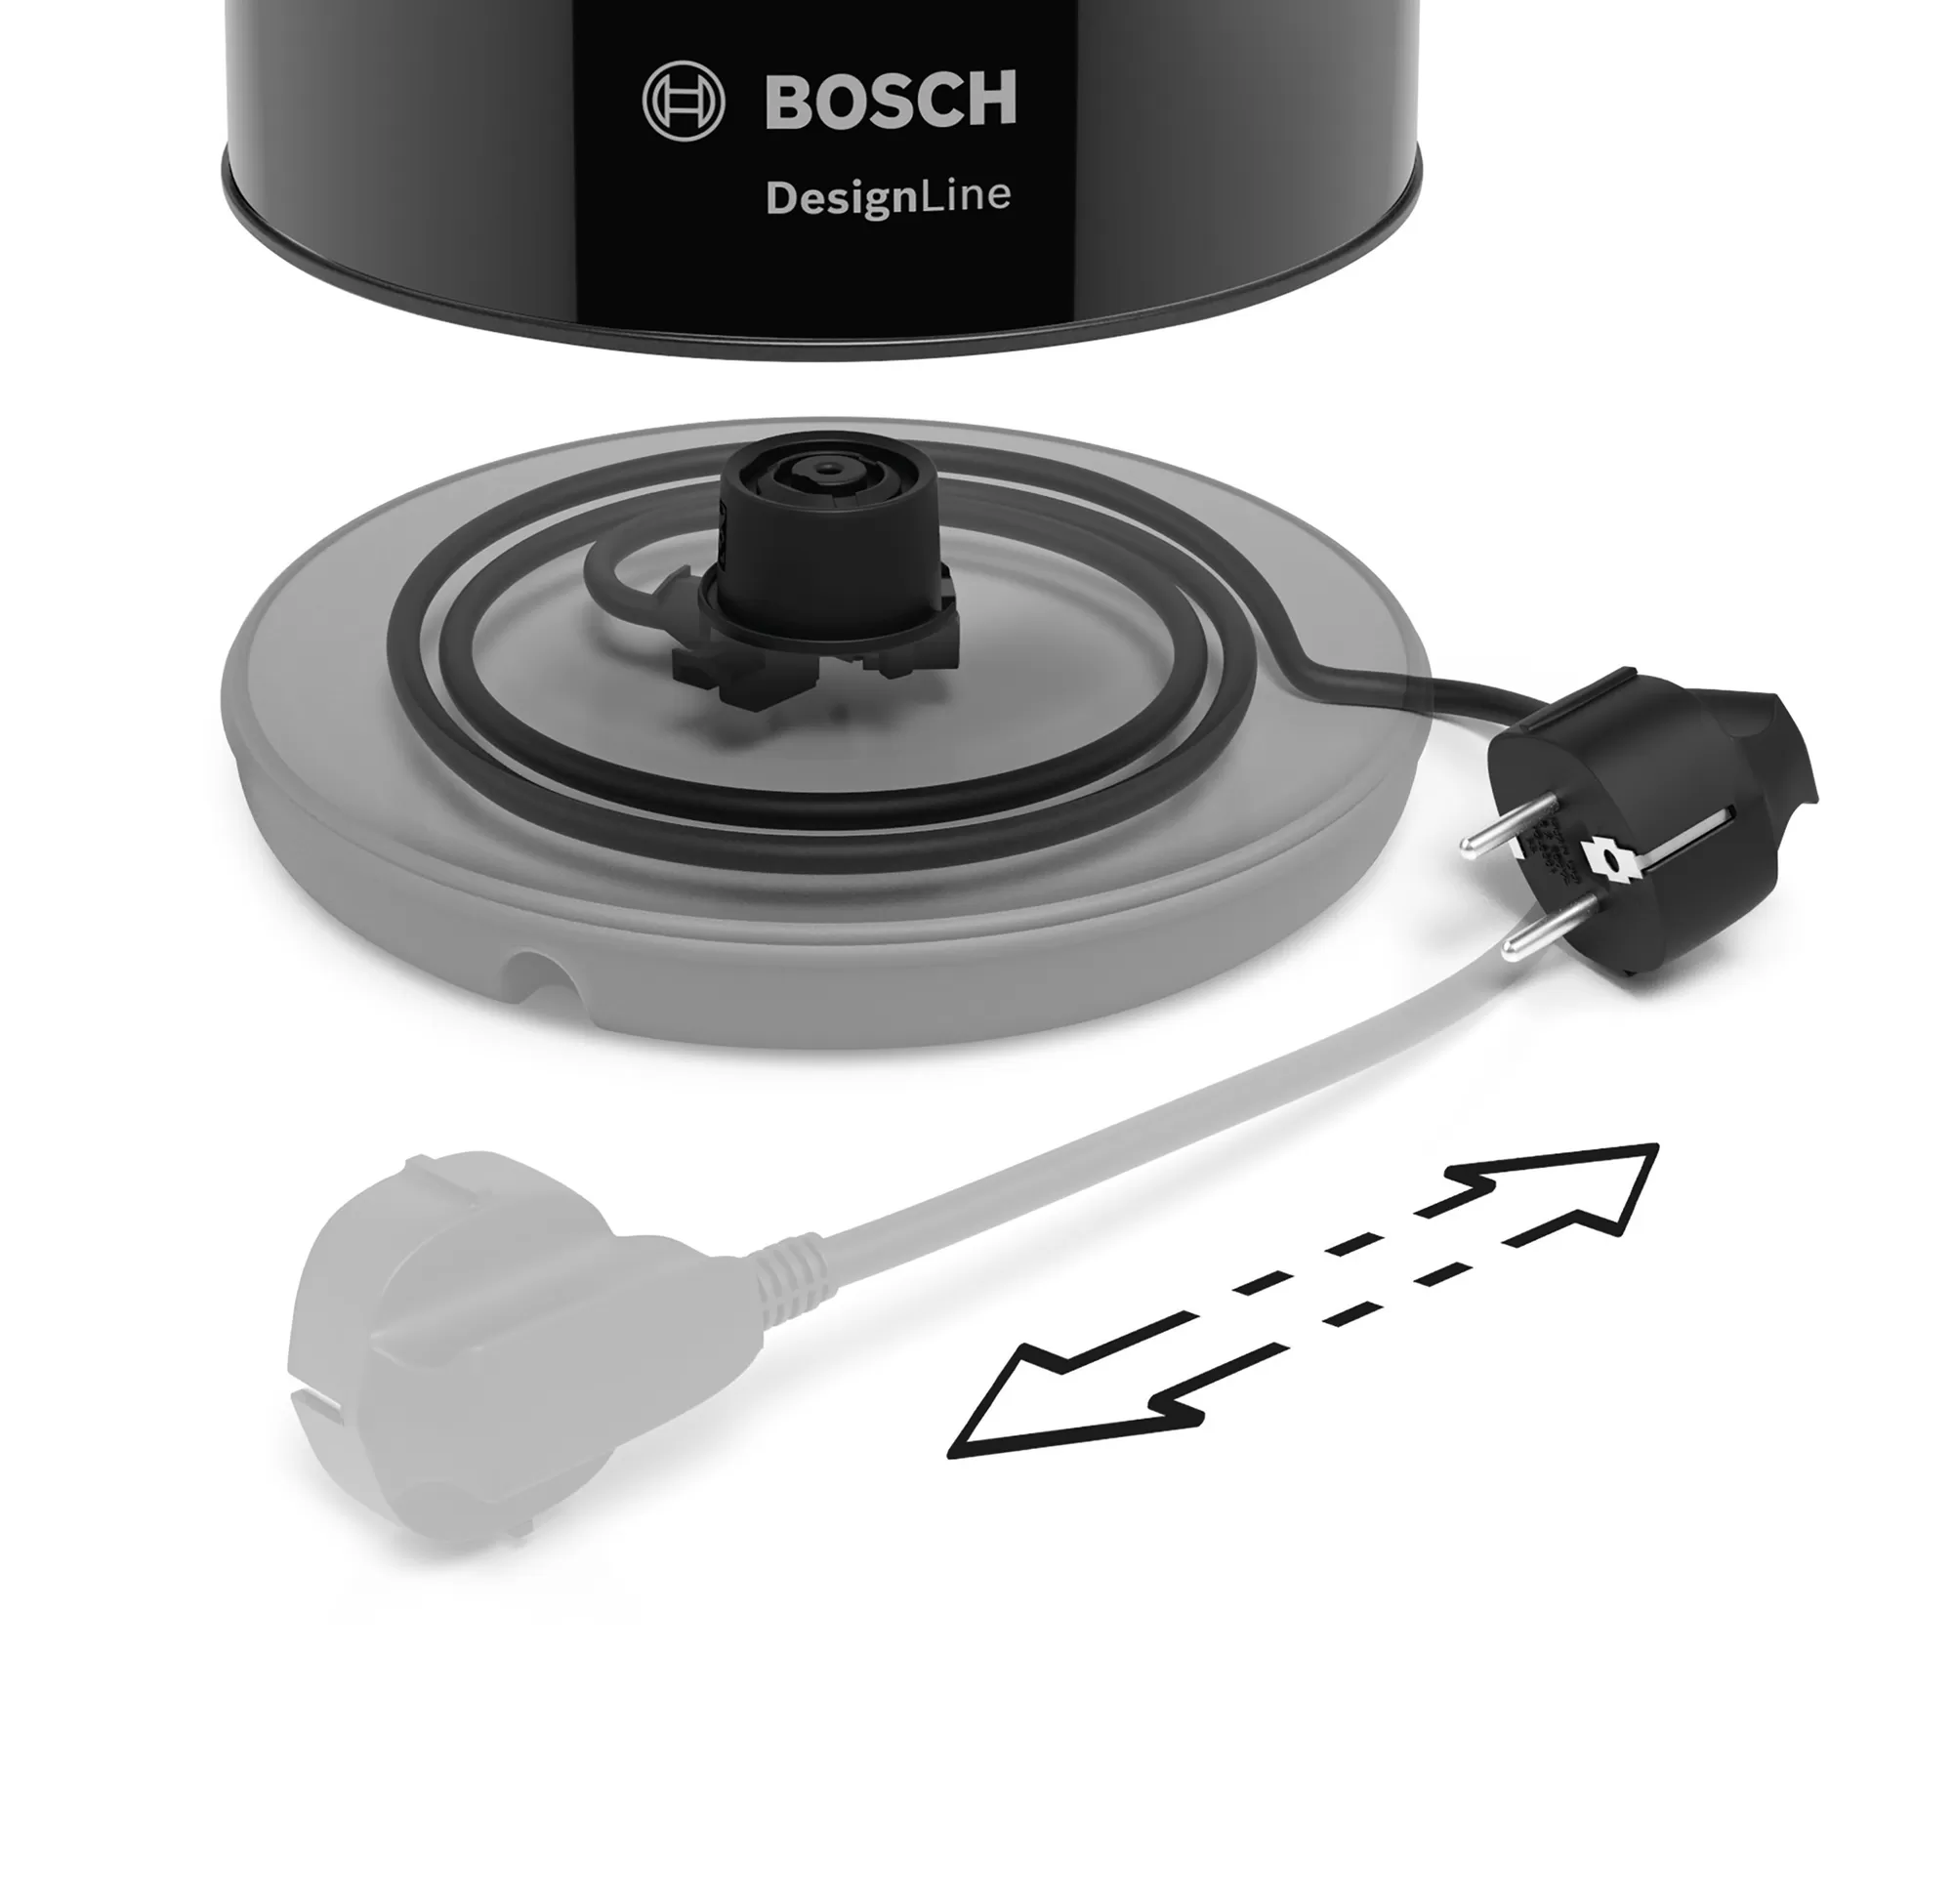 Bosch Water Kettle 1.7Lit 2400W Black - Whole and All